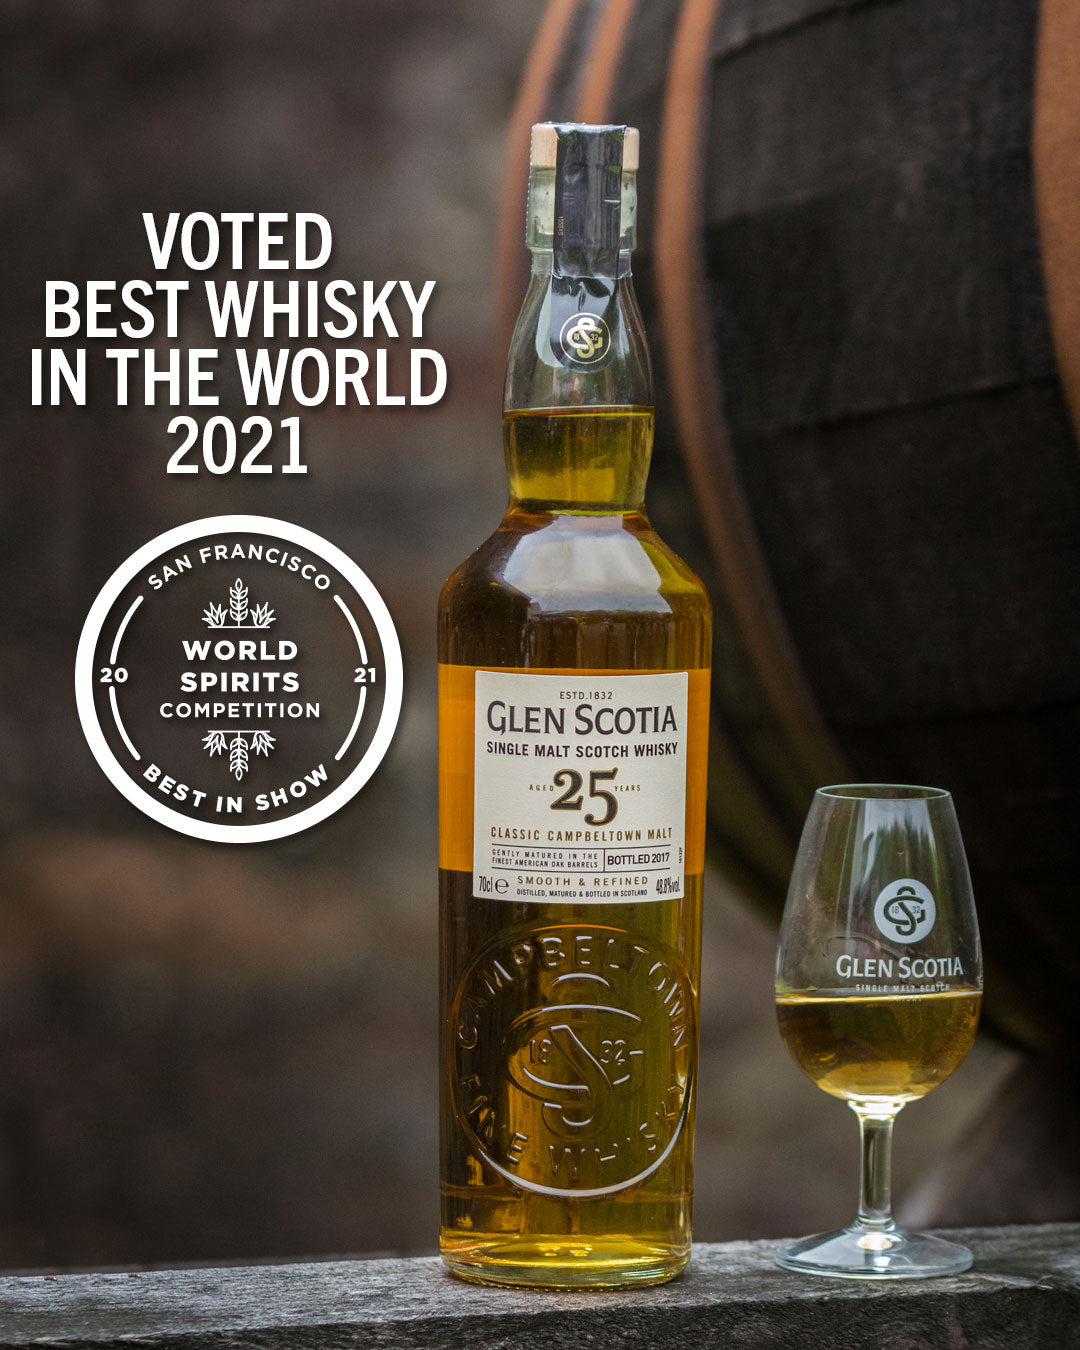 Glen Scotia 25 Year Old Named Best Whisky In The World